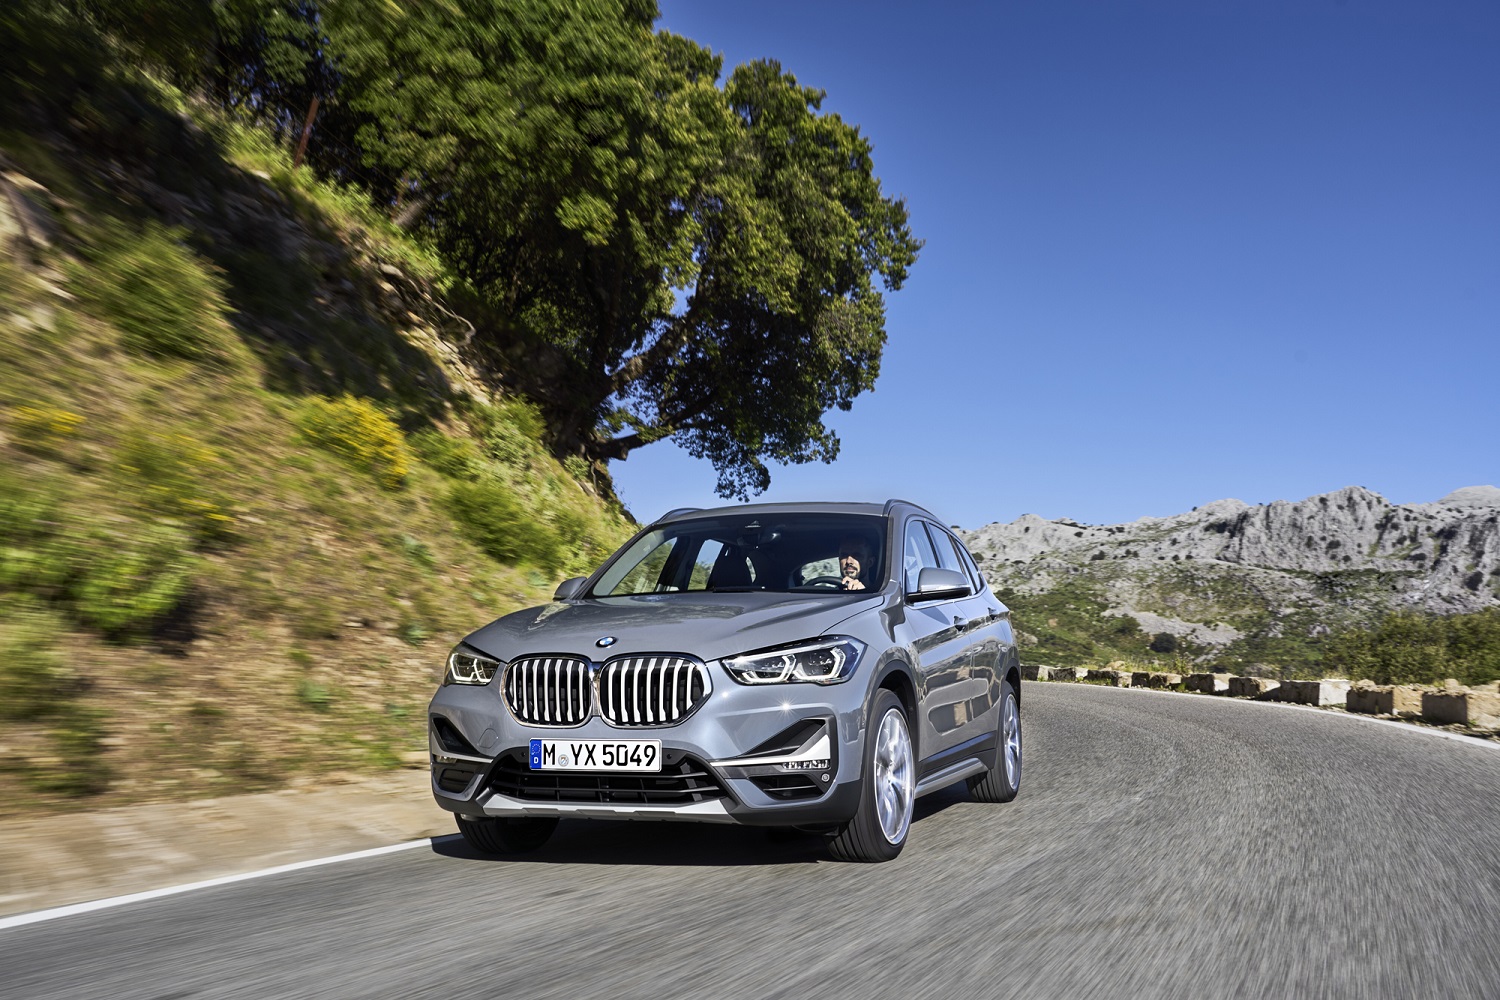 2020 bmw x1 gets new look front end interior upgrades official 1